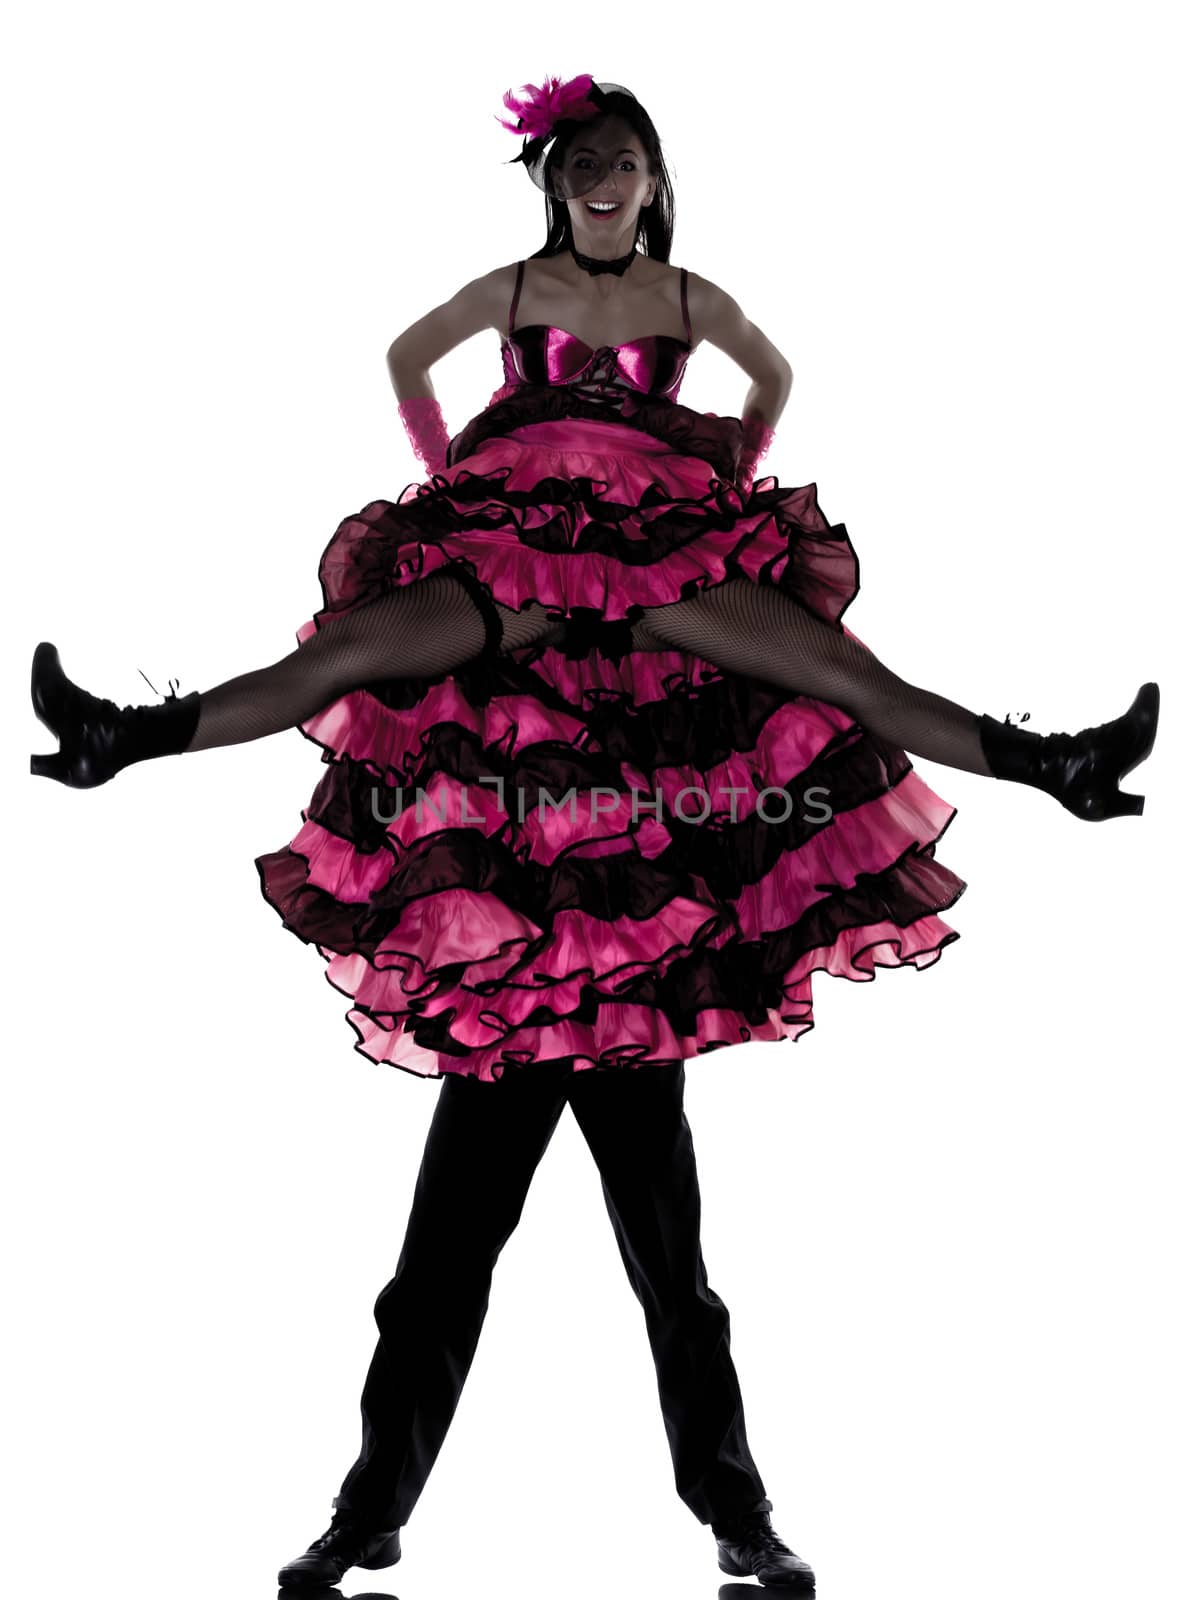 couple man woman dancer dancing french cancan silhouette by PIXSTILL